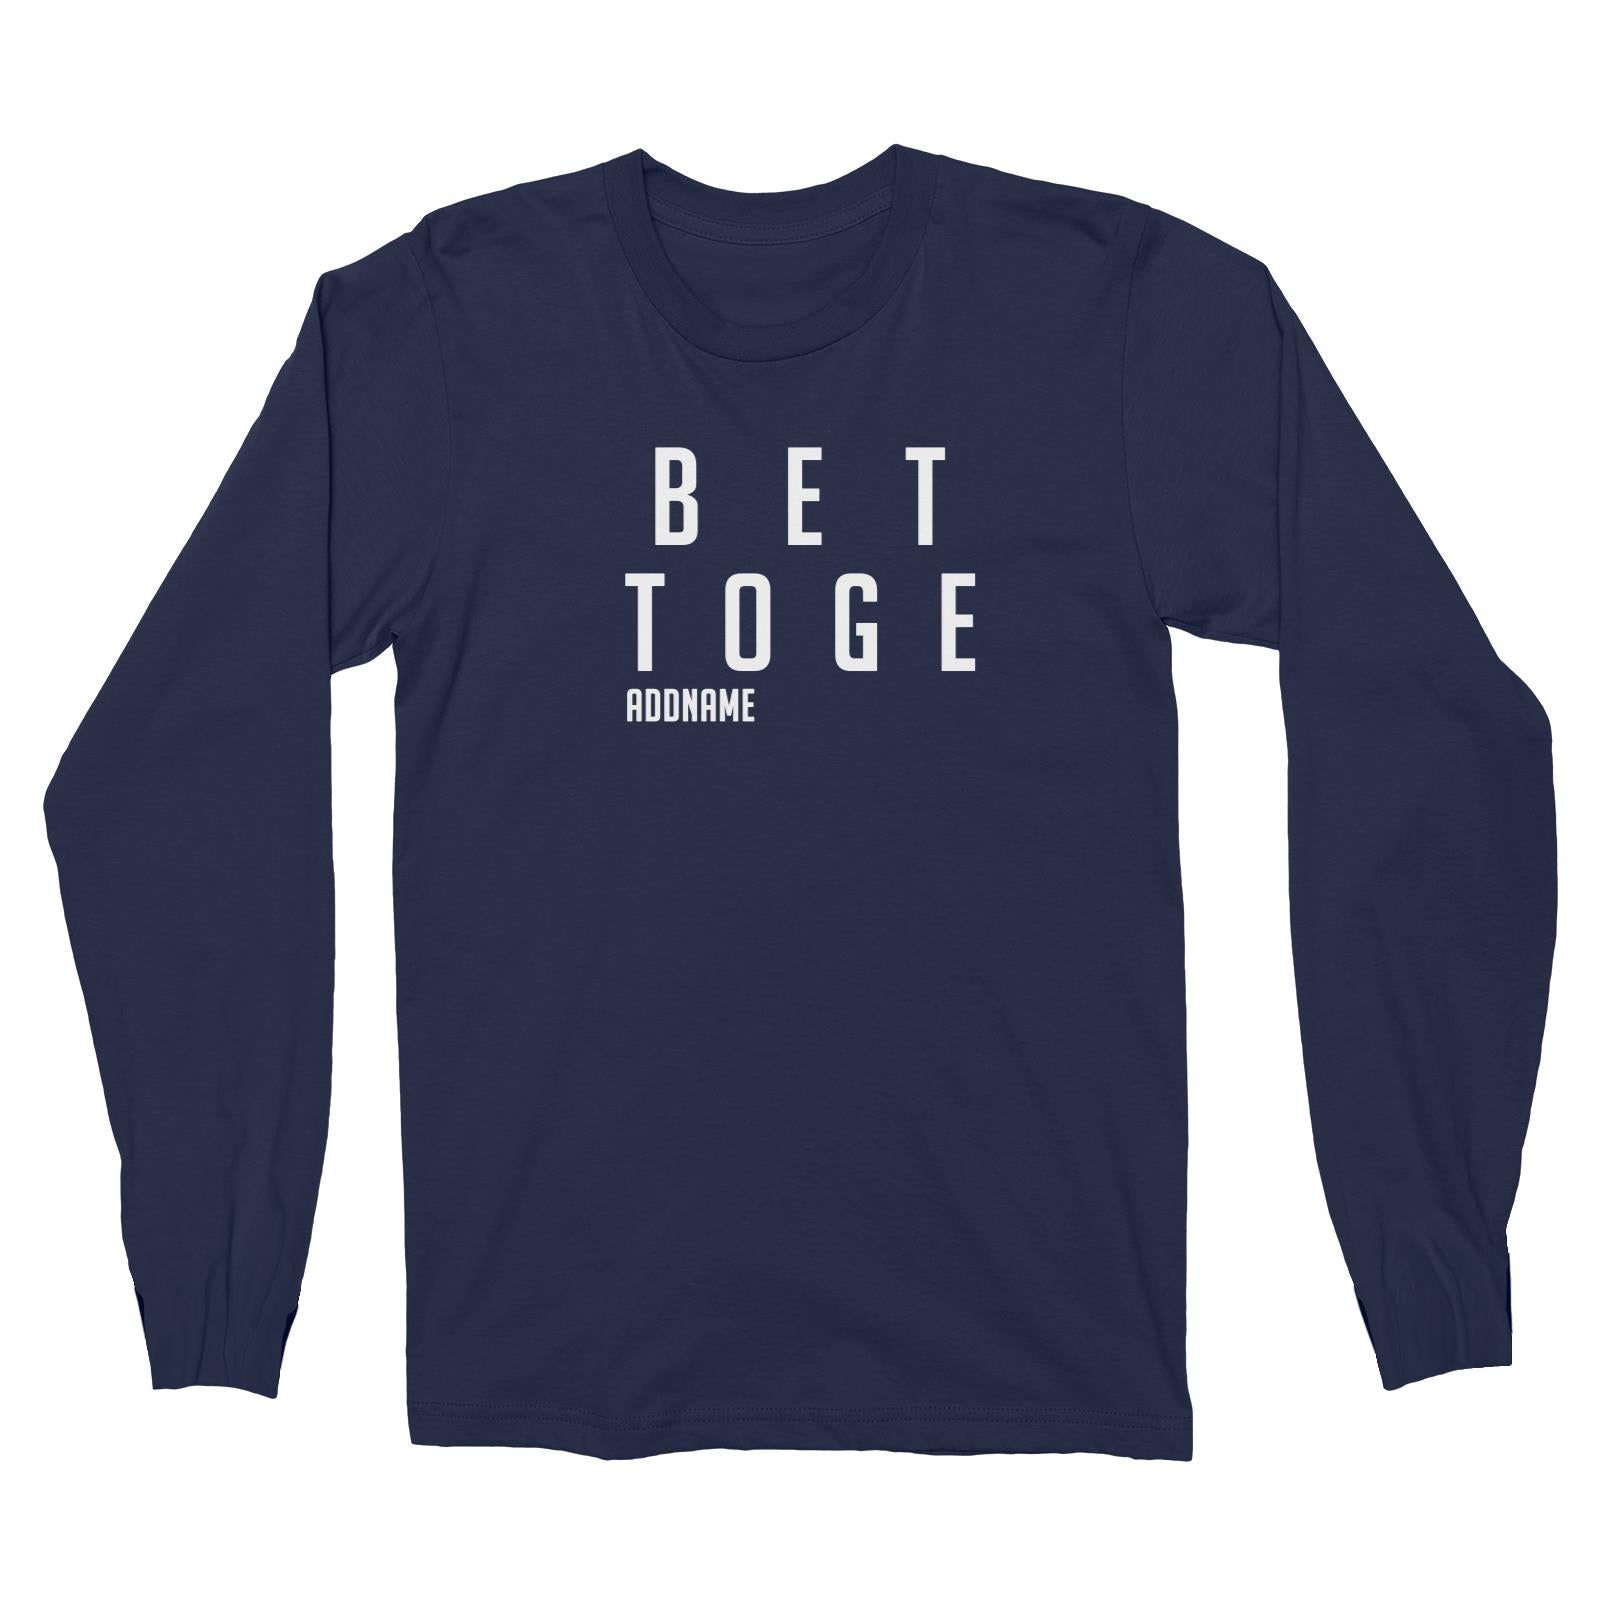 Couple Series Better Addname Long Sleeve Unisex T-Shirt